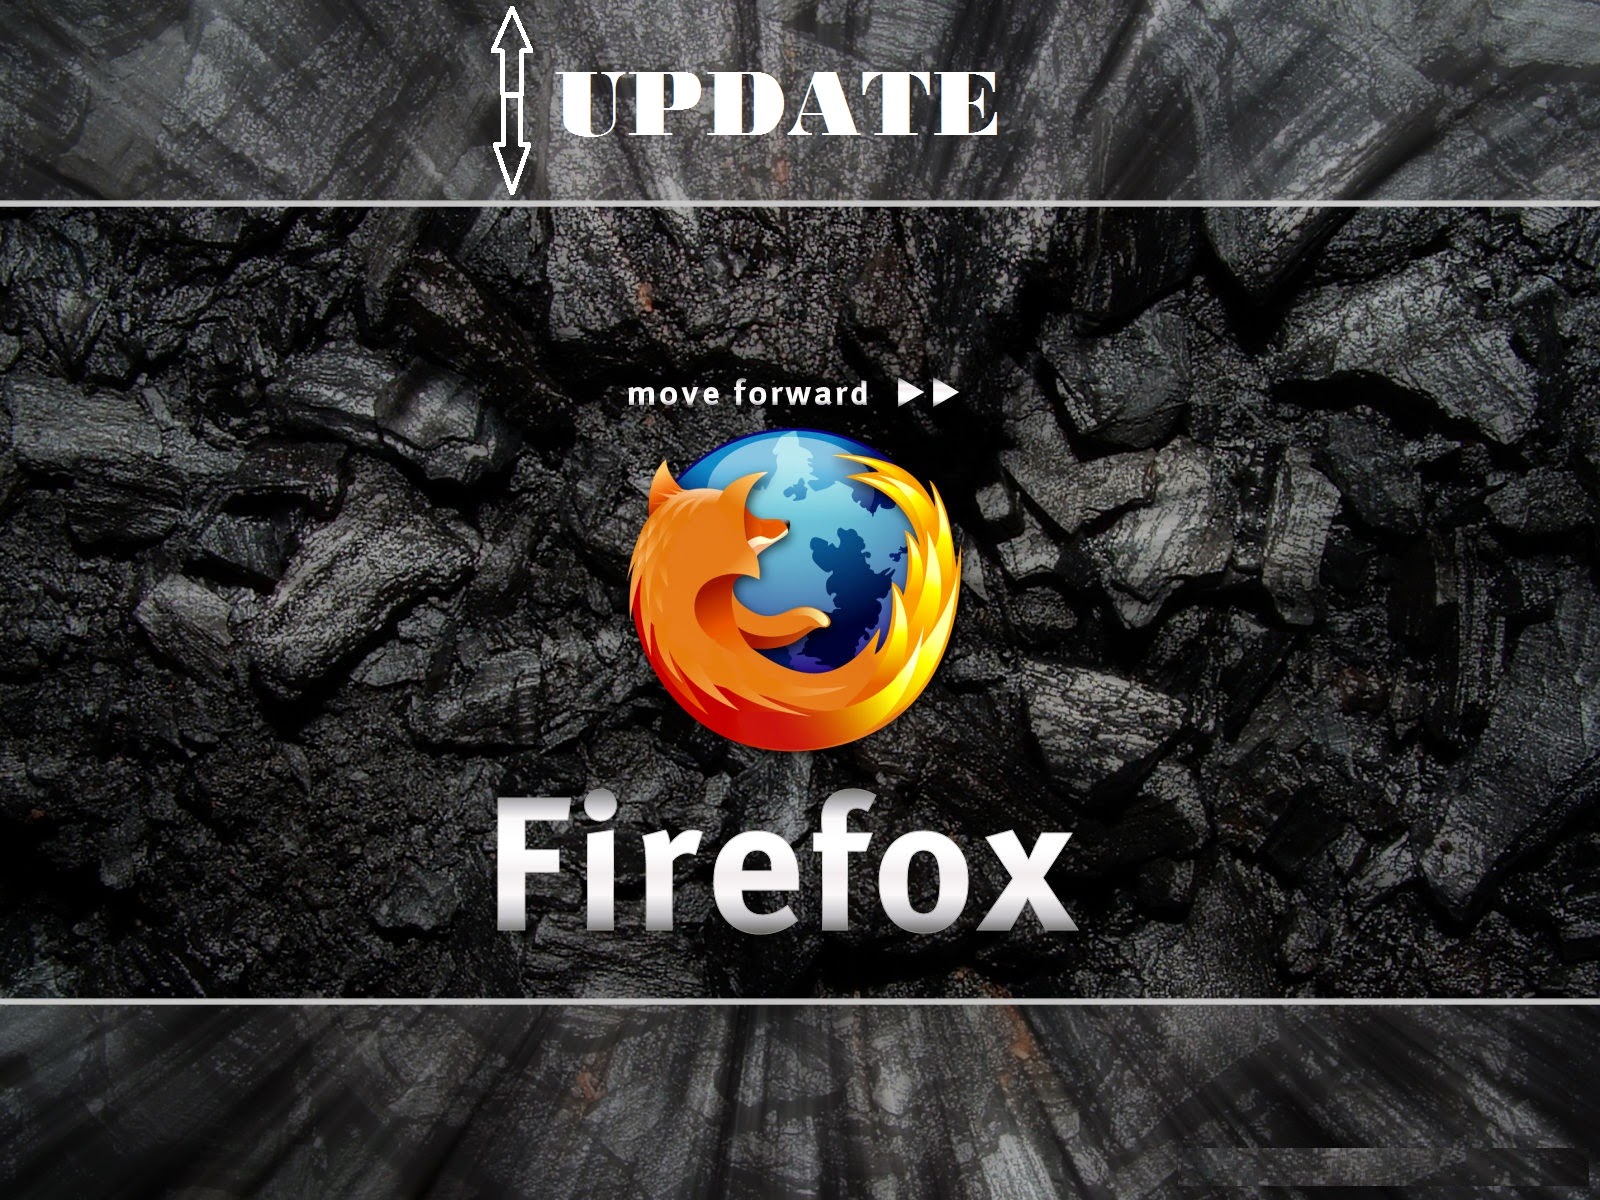 How to manually upgrade/update Mozilla Firefox, Firefox, update, manually, update Firefox, manual update, Manually Updating, mozilla firefox, Mozilla Firefox upgrade update, do you, VIDEO'S, how do you update mozilla firefox, update mozilla firefox 2014, update mozilla firefox for windows 8, update mozilla firefox windows 7, update mozilla firefox latest version free download